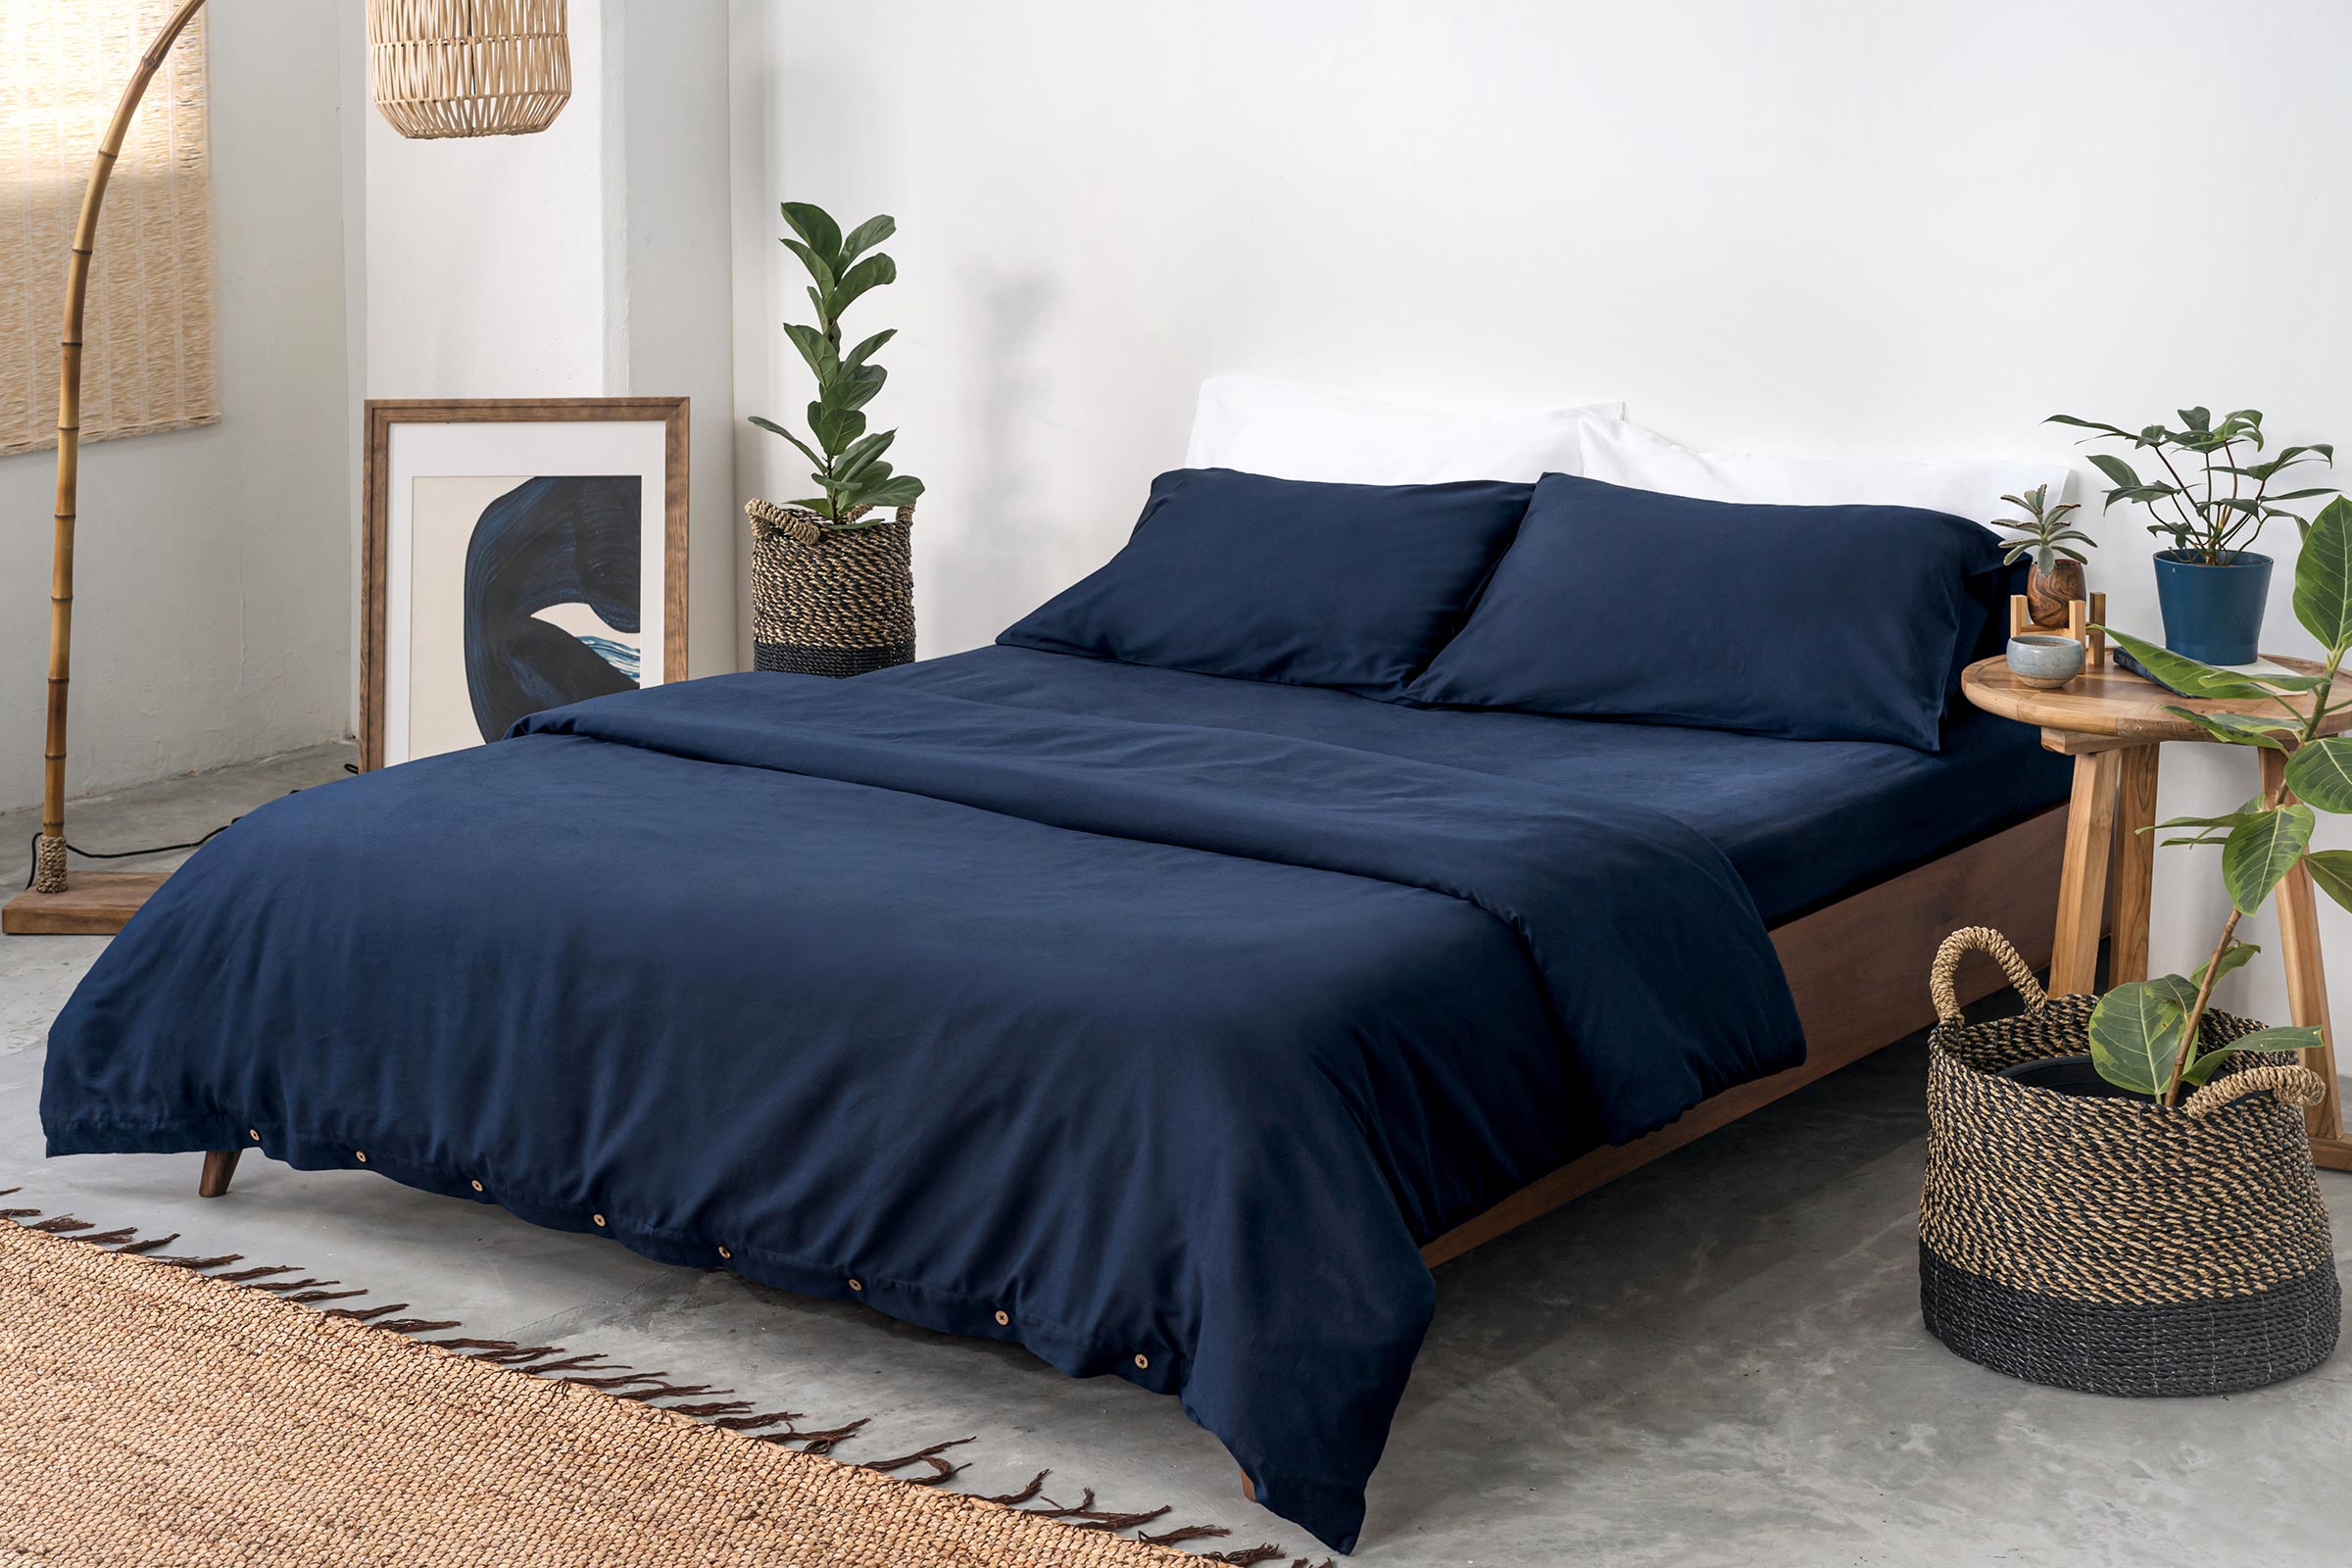 classic-navy-fitted-sheet-duvet-cover-pillowcase-pair-white-pillowcase-pair-side-view-by-sojao.jpg